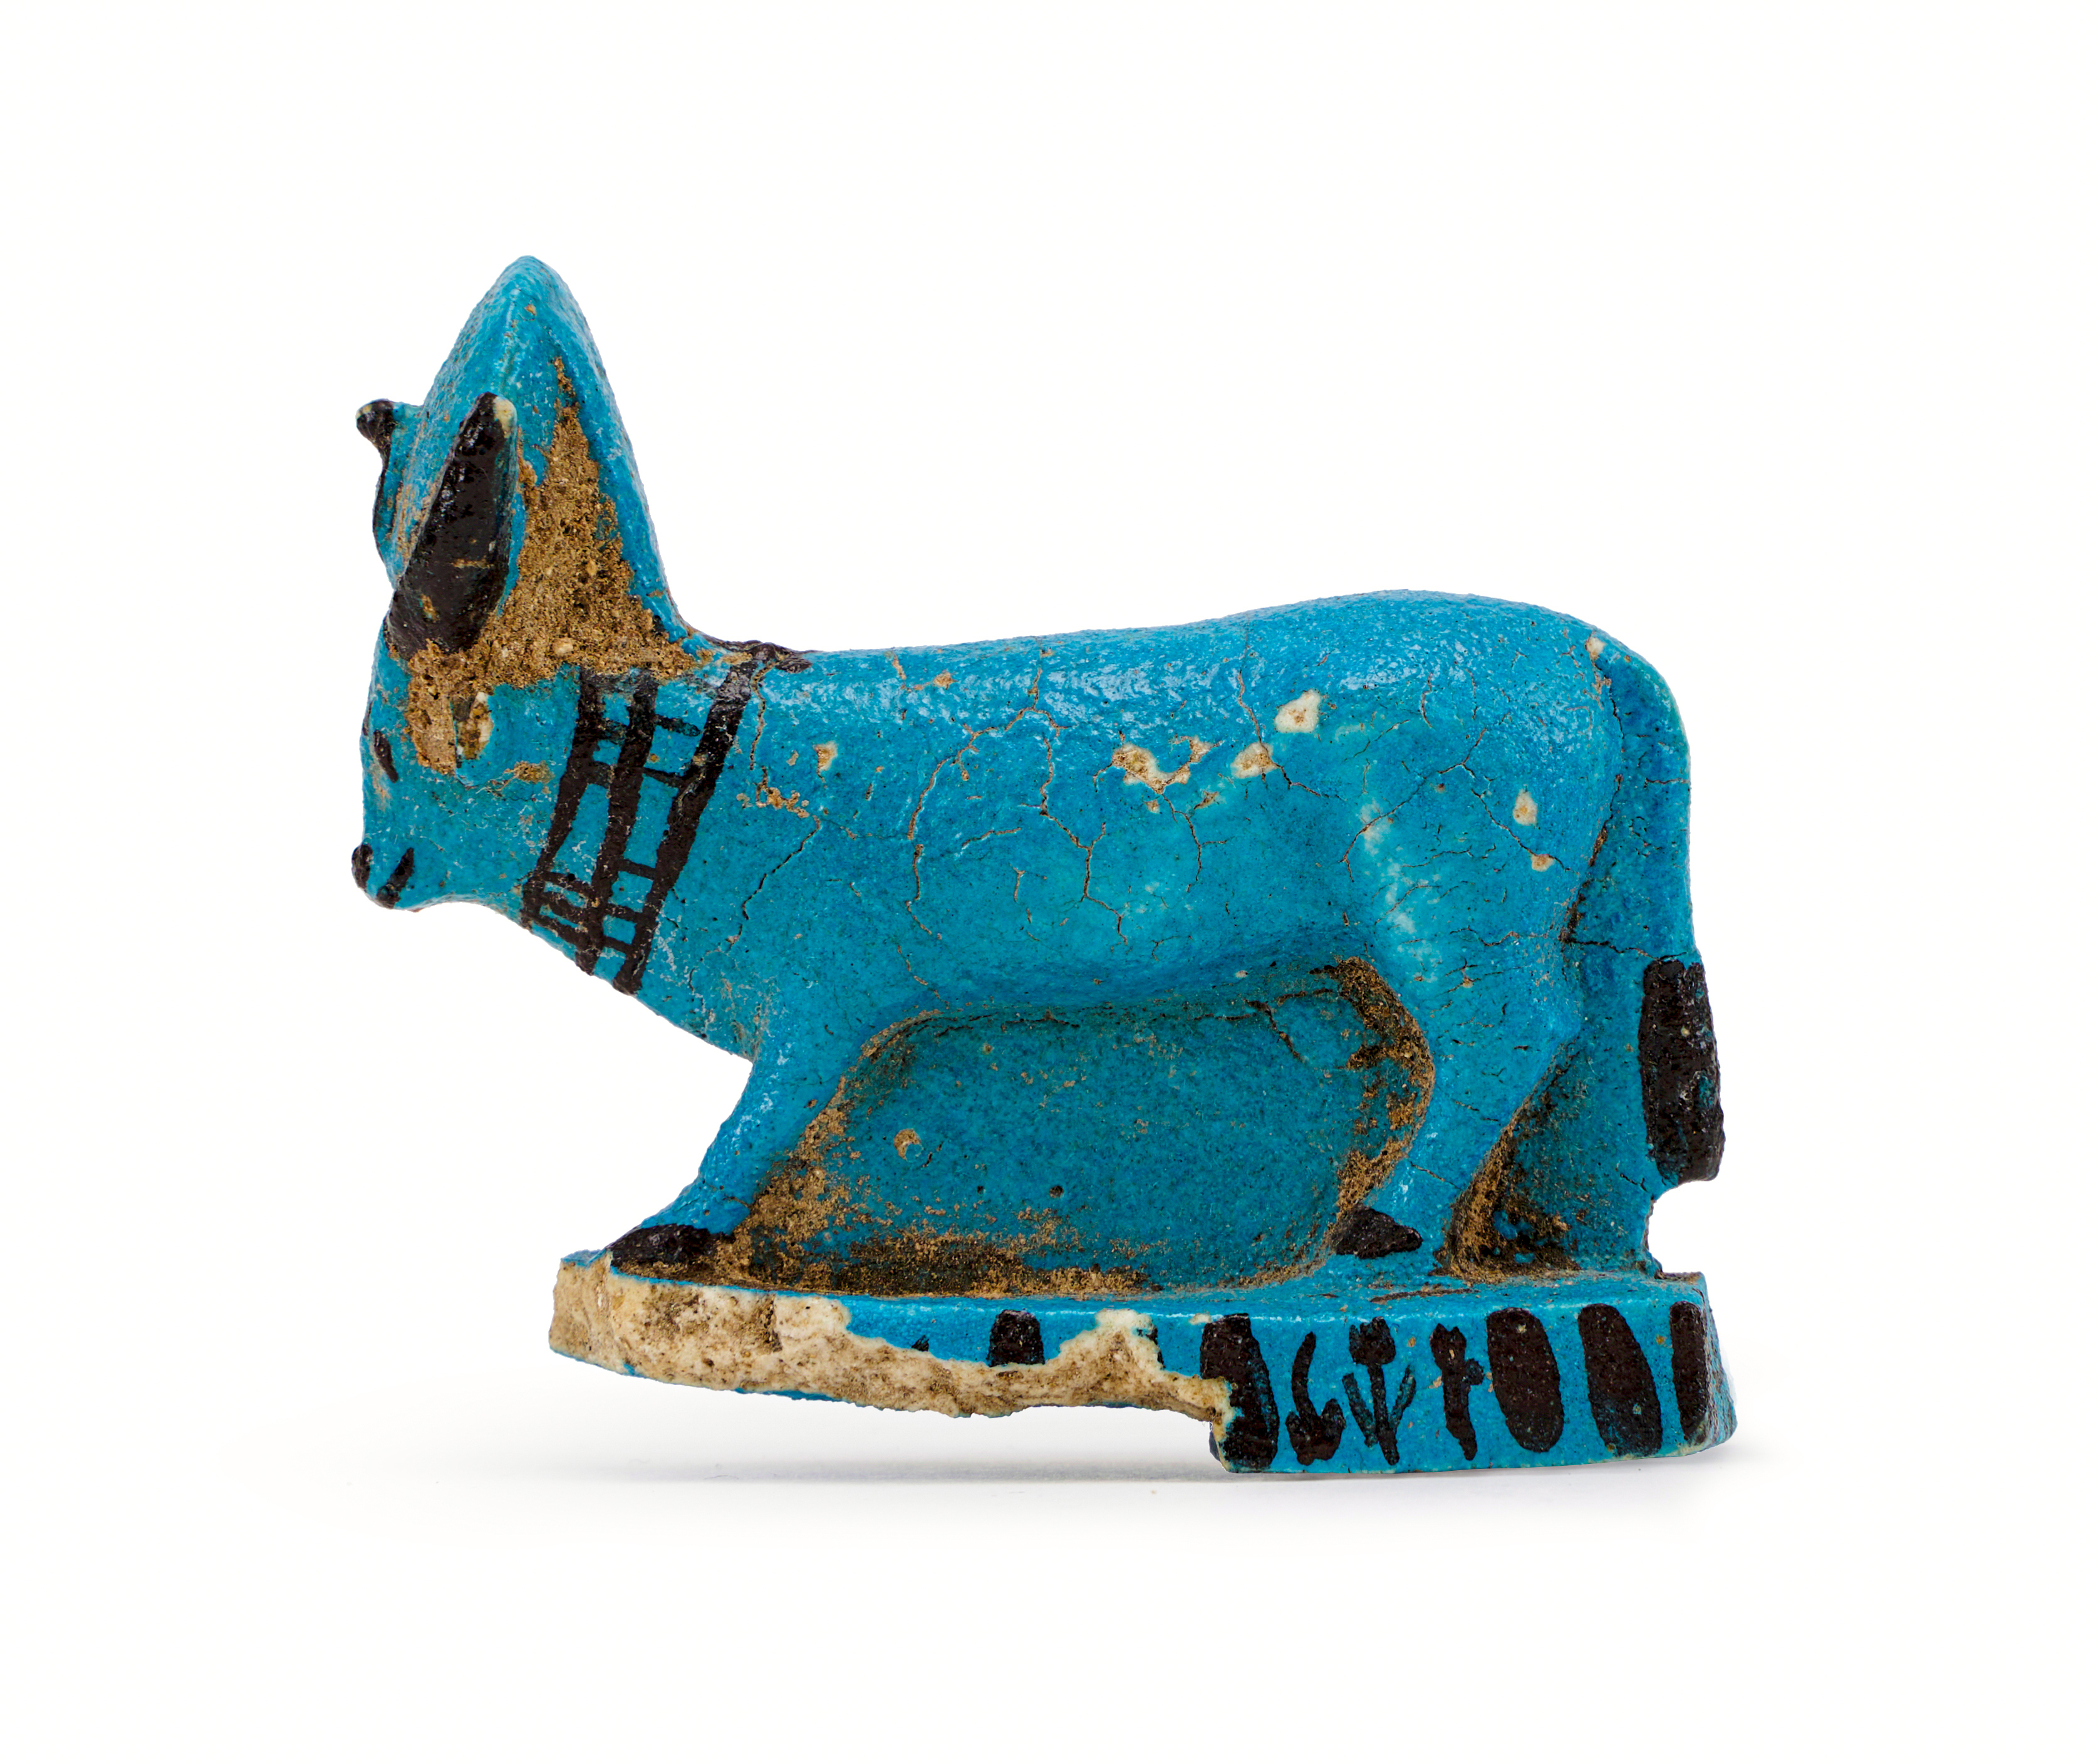 AN EGYPTIAN FAIENCE APIS BULL LATE PERIOD, 26TH-30TH DYNASTY, 664-343 B.C. - Image 2 of 4